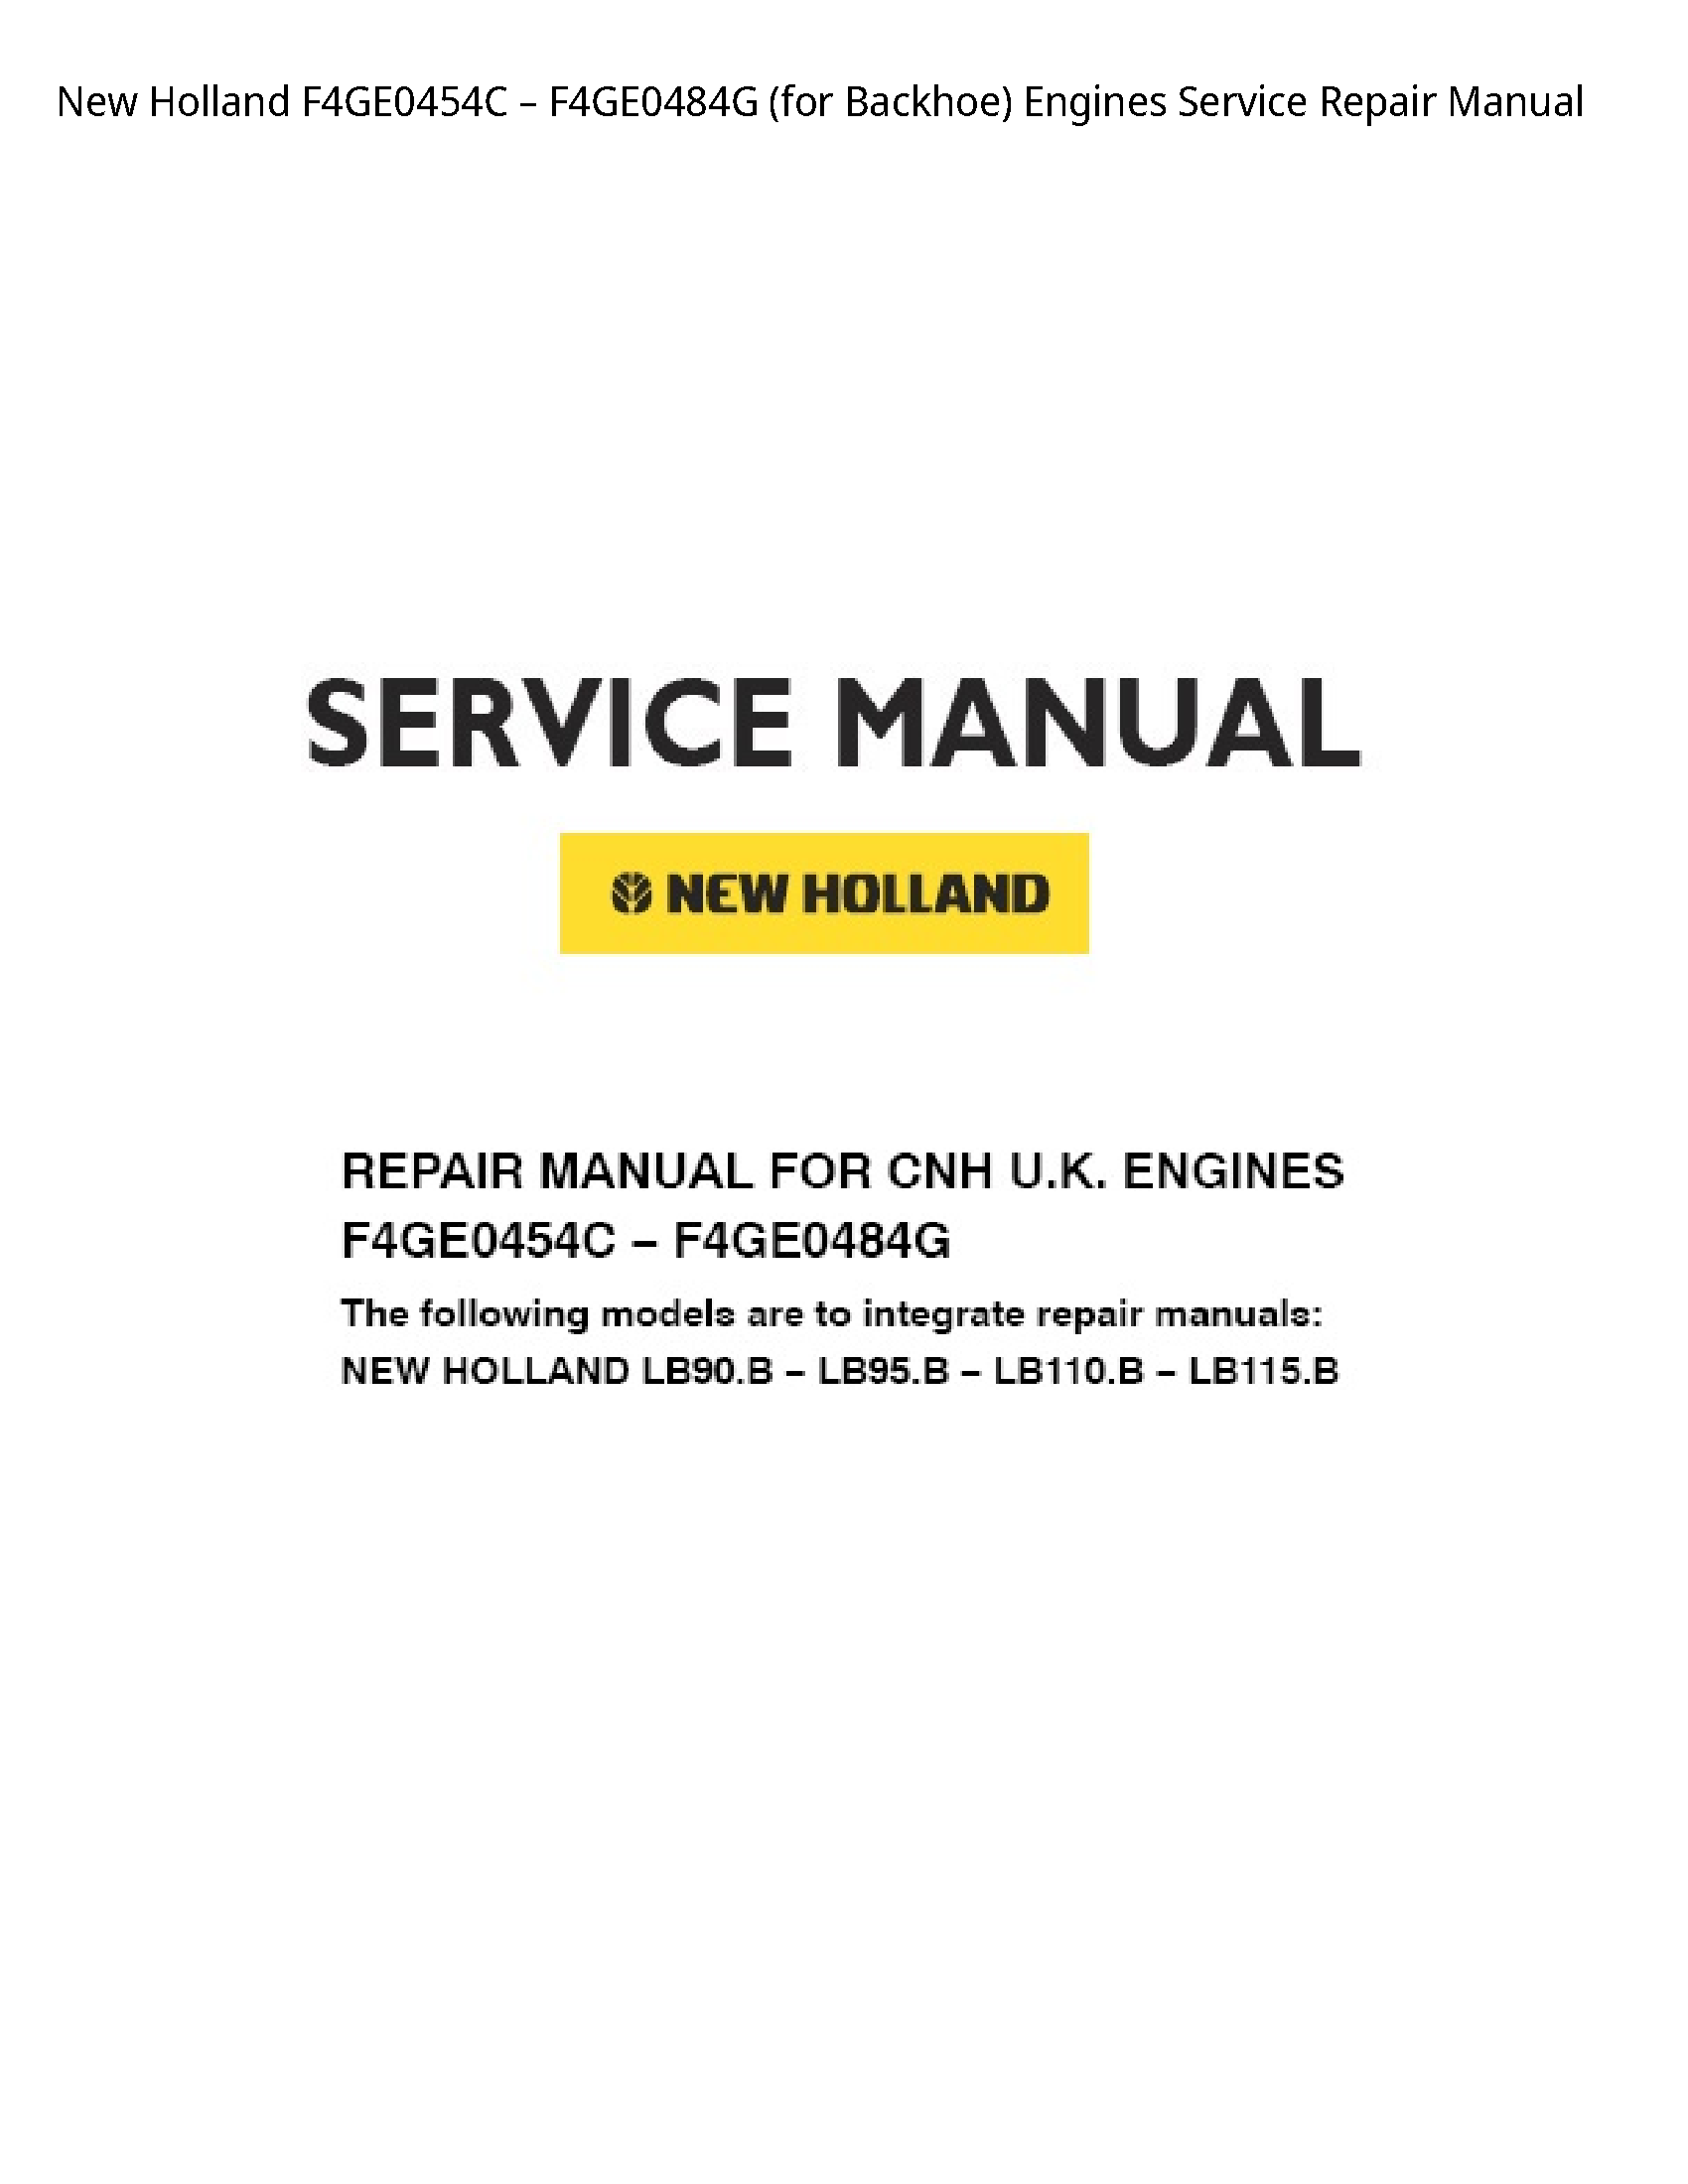 New Holland F4GE0454C (for Backhoe) Engines manual